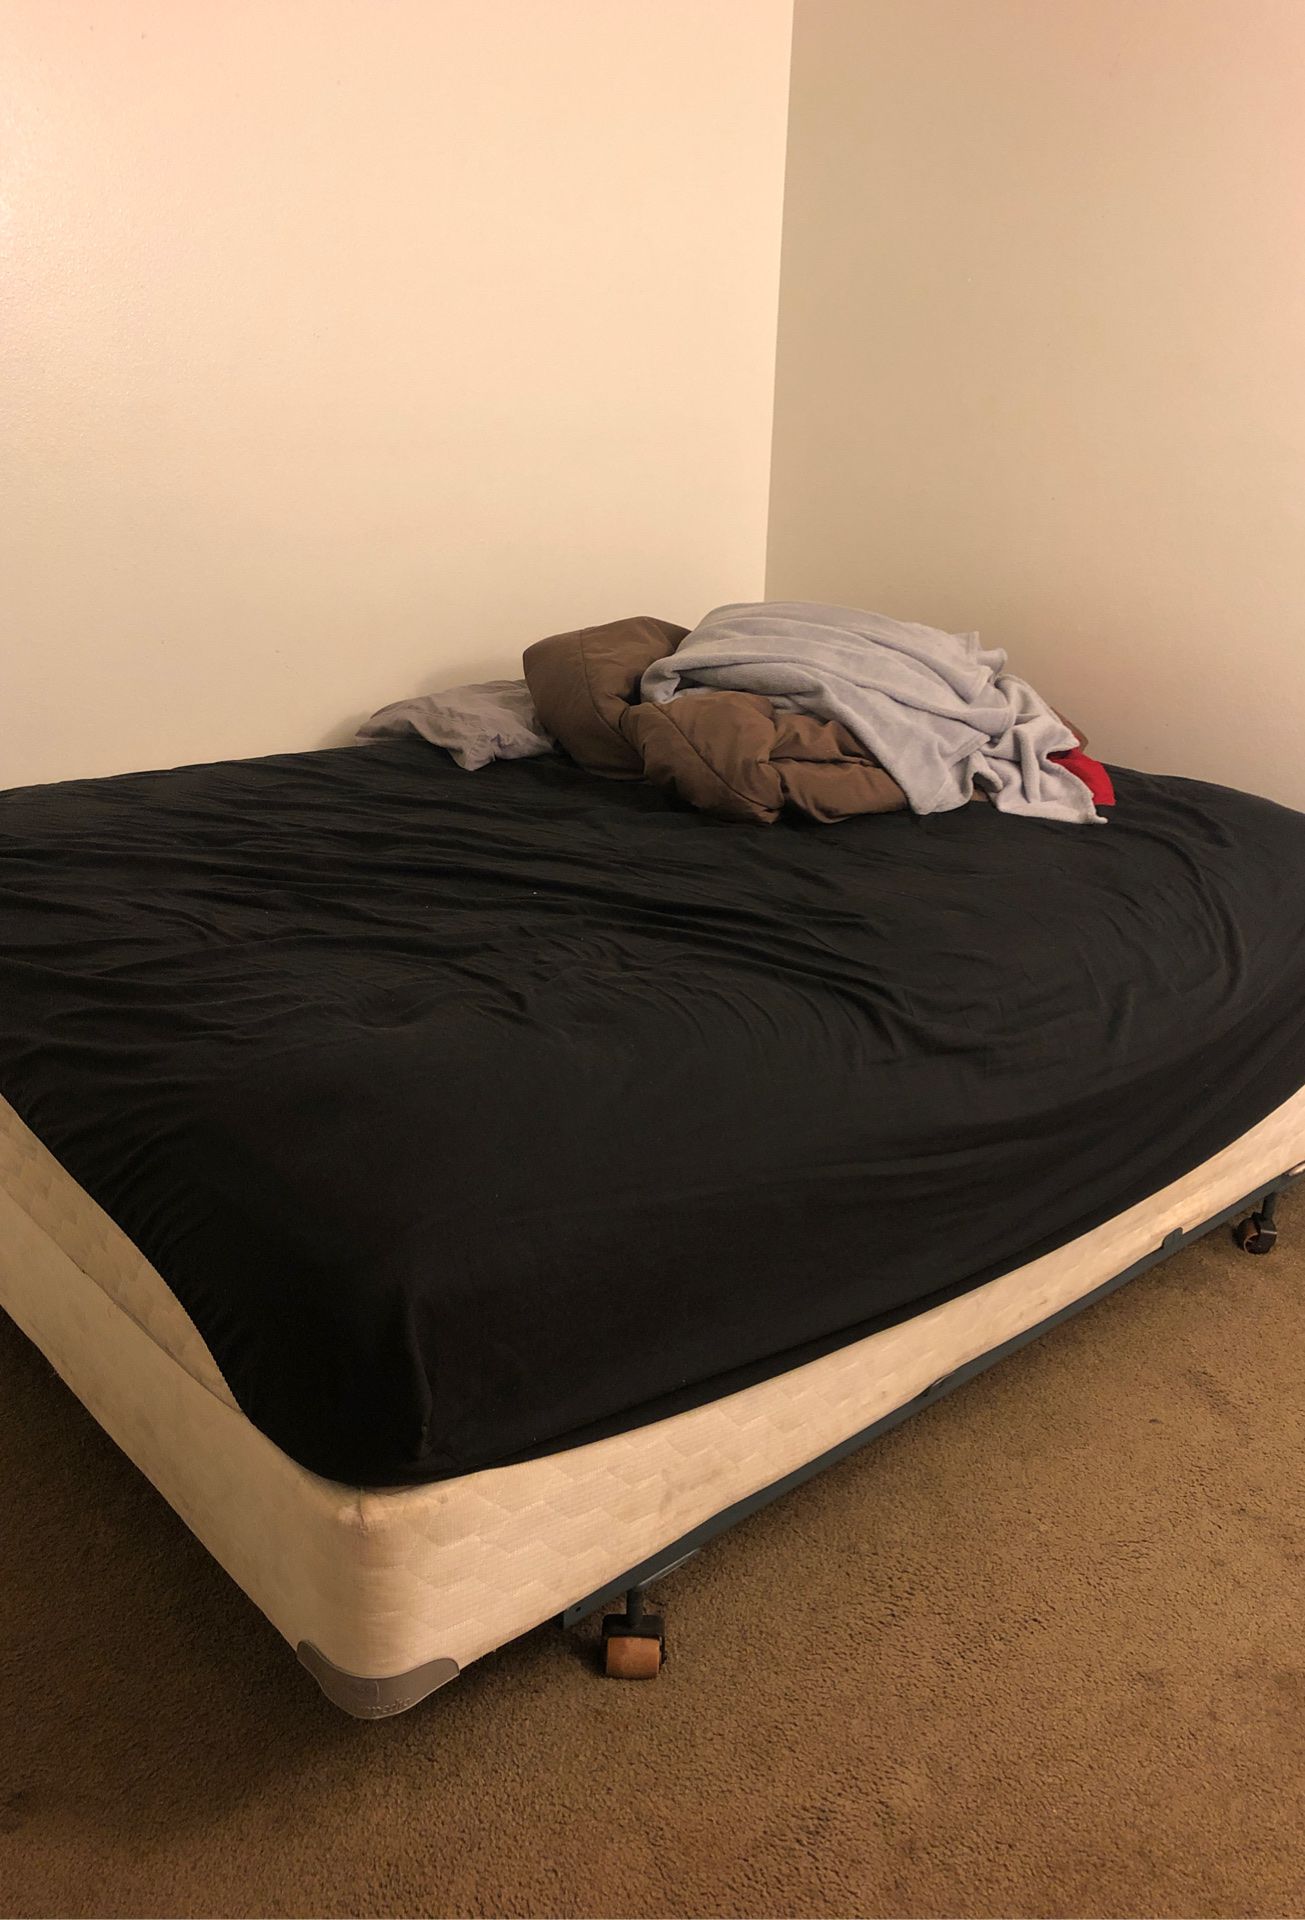 Queen bed for free